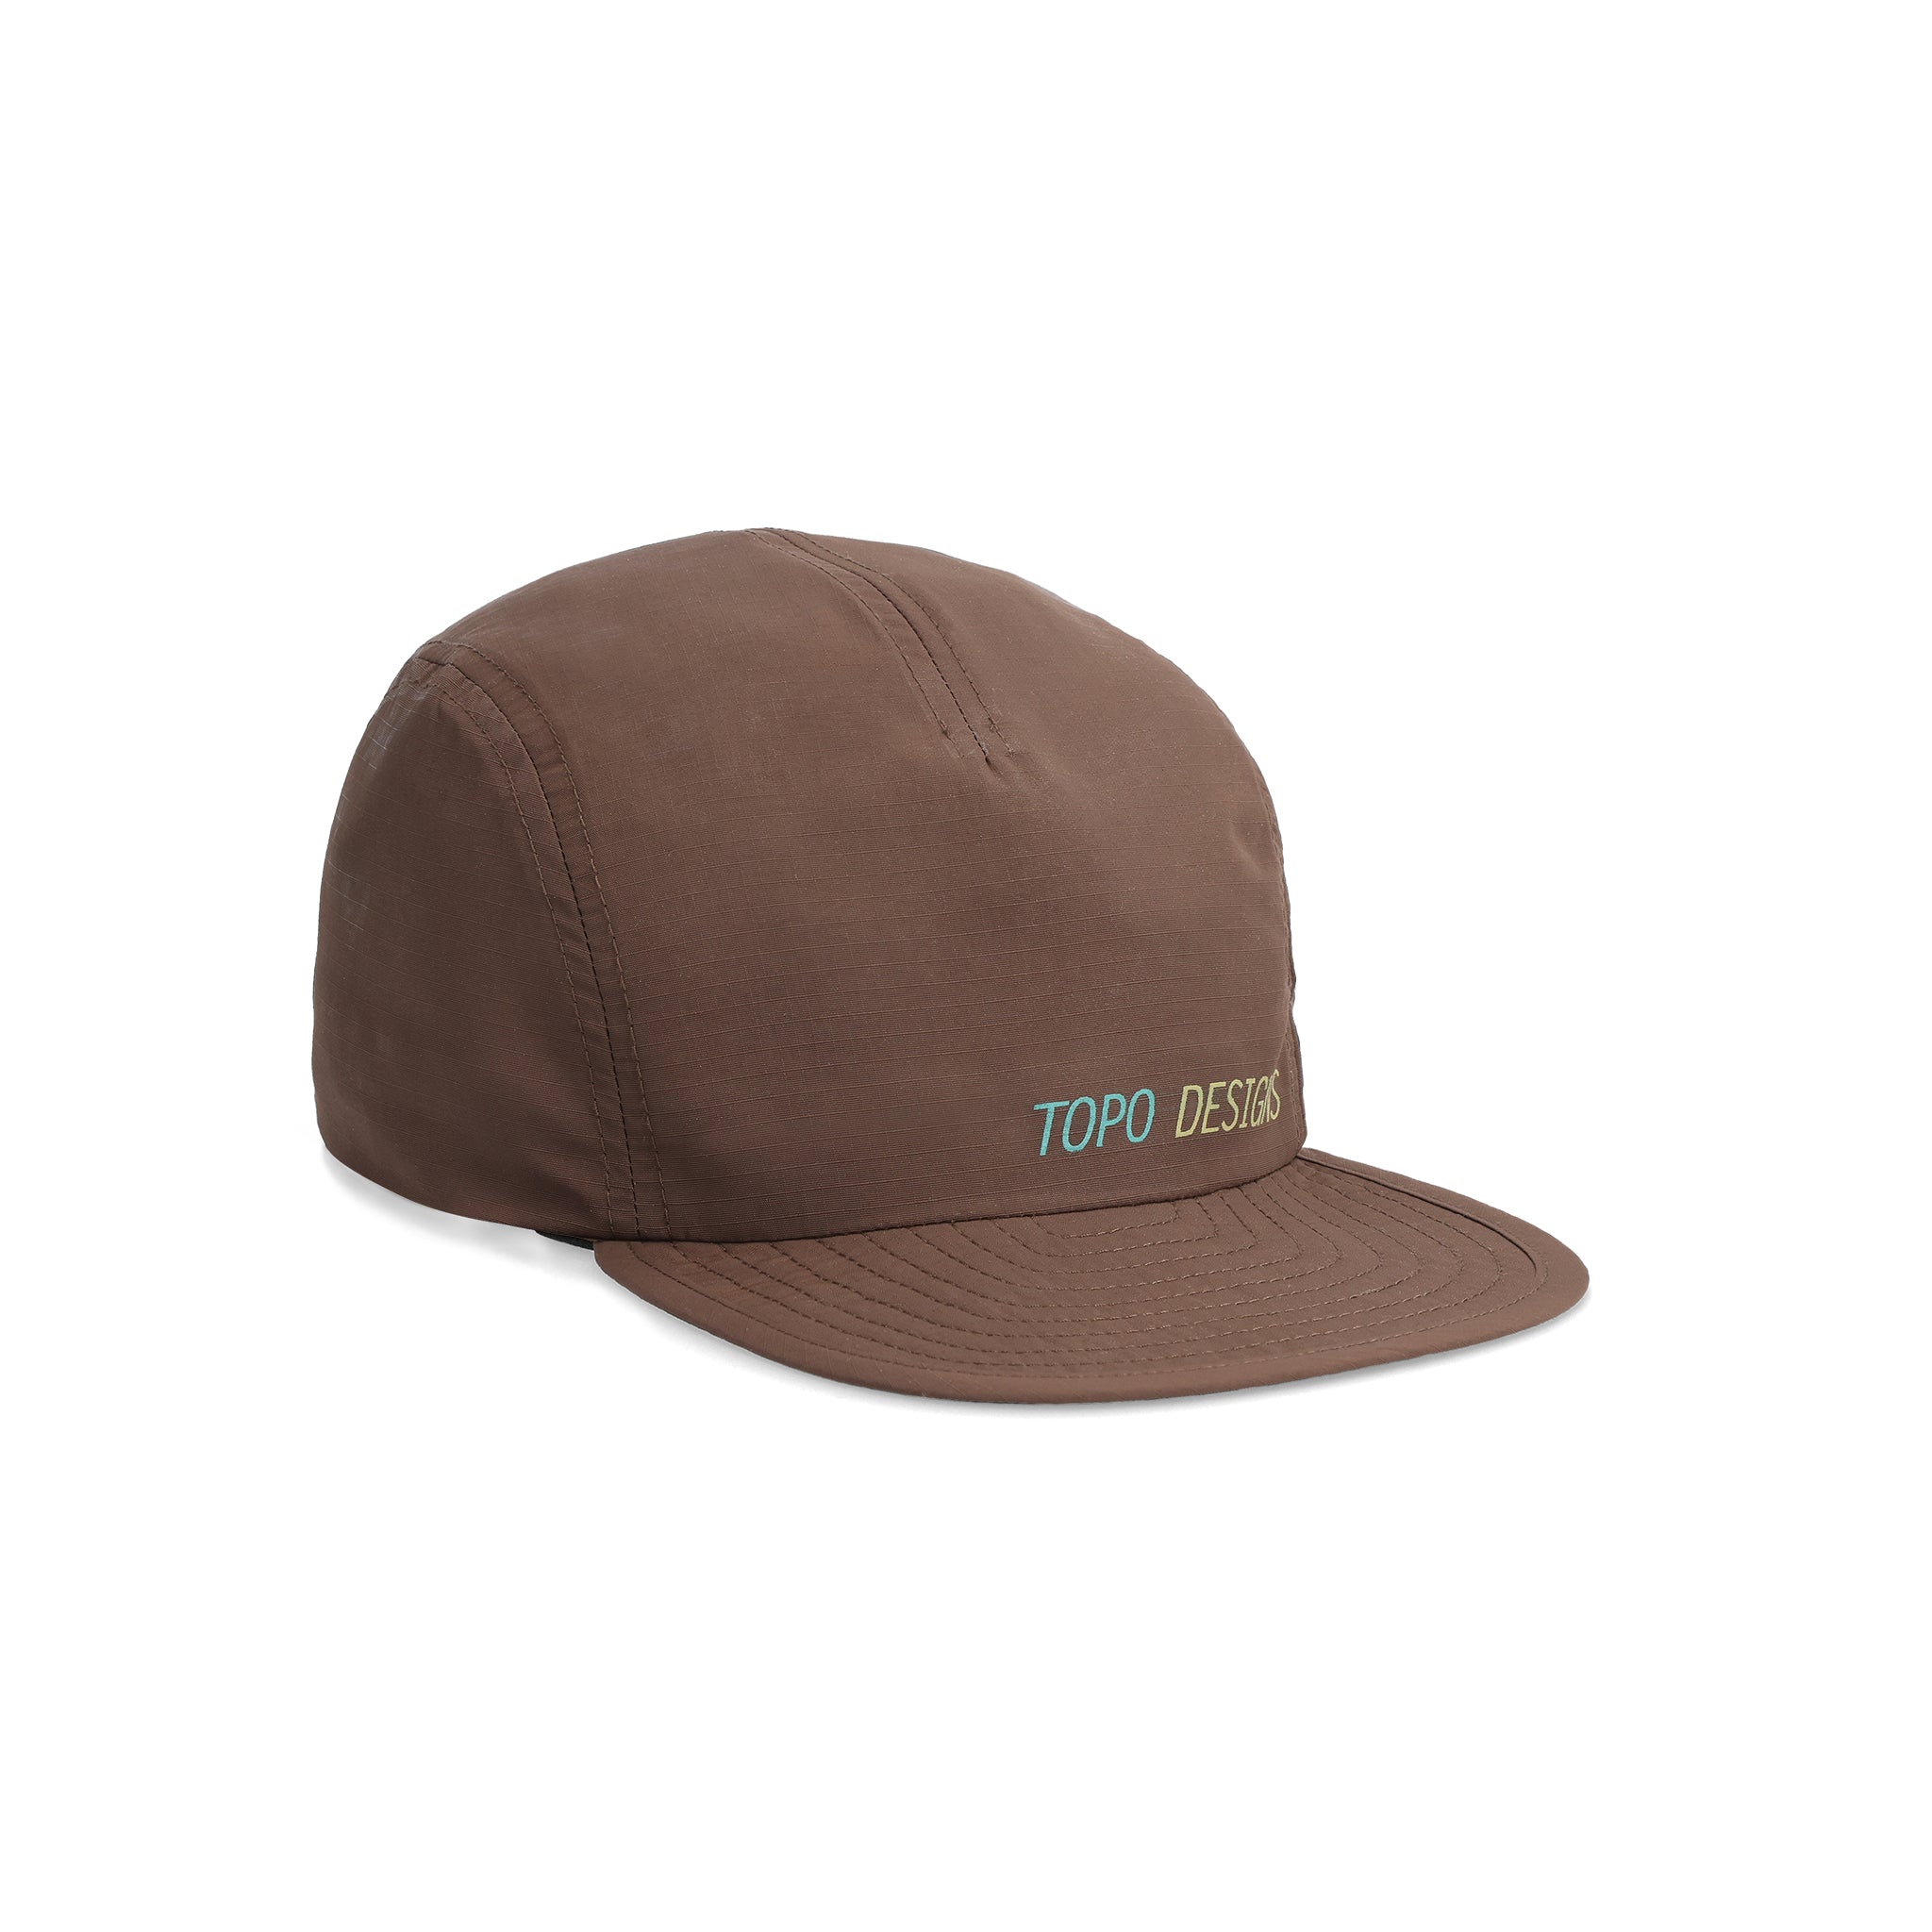 Front View of Topo Designs Global Packable Hat in "Desert Palm"